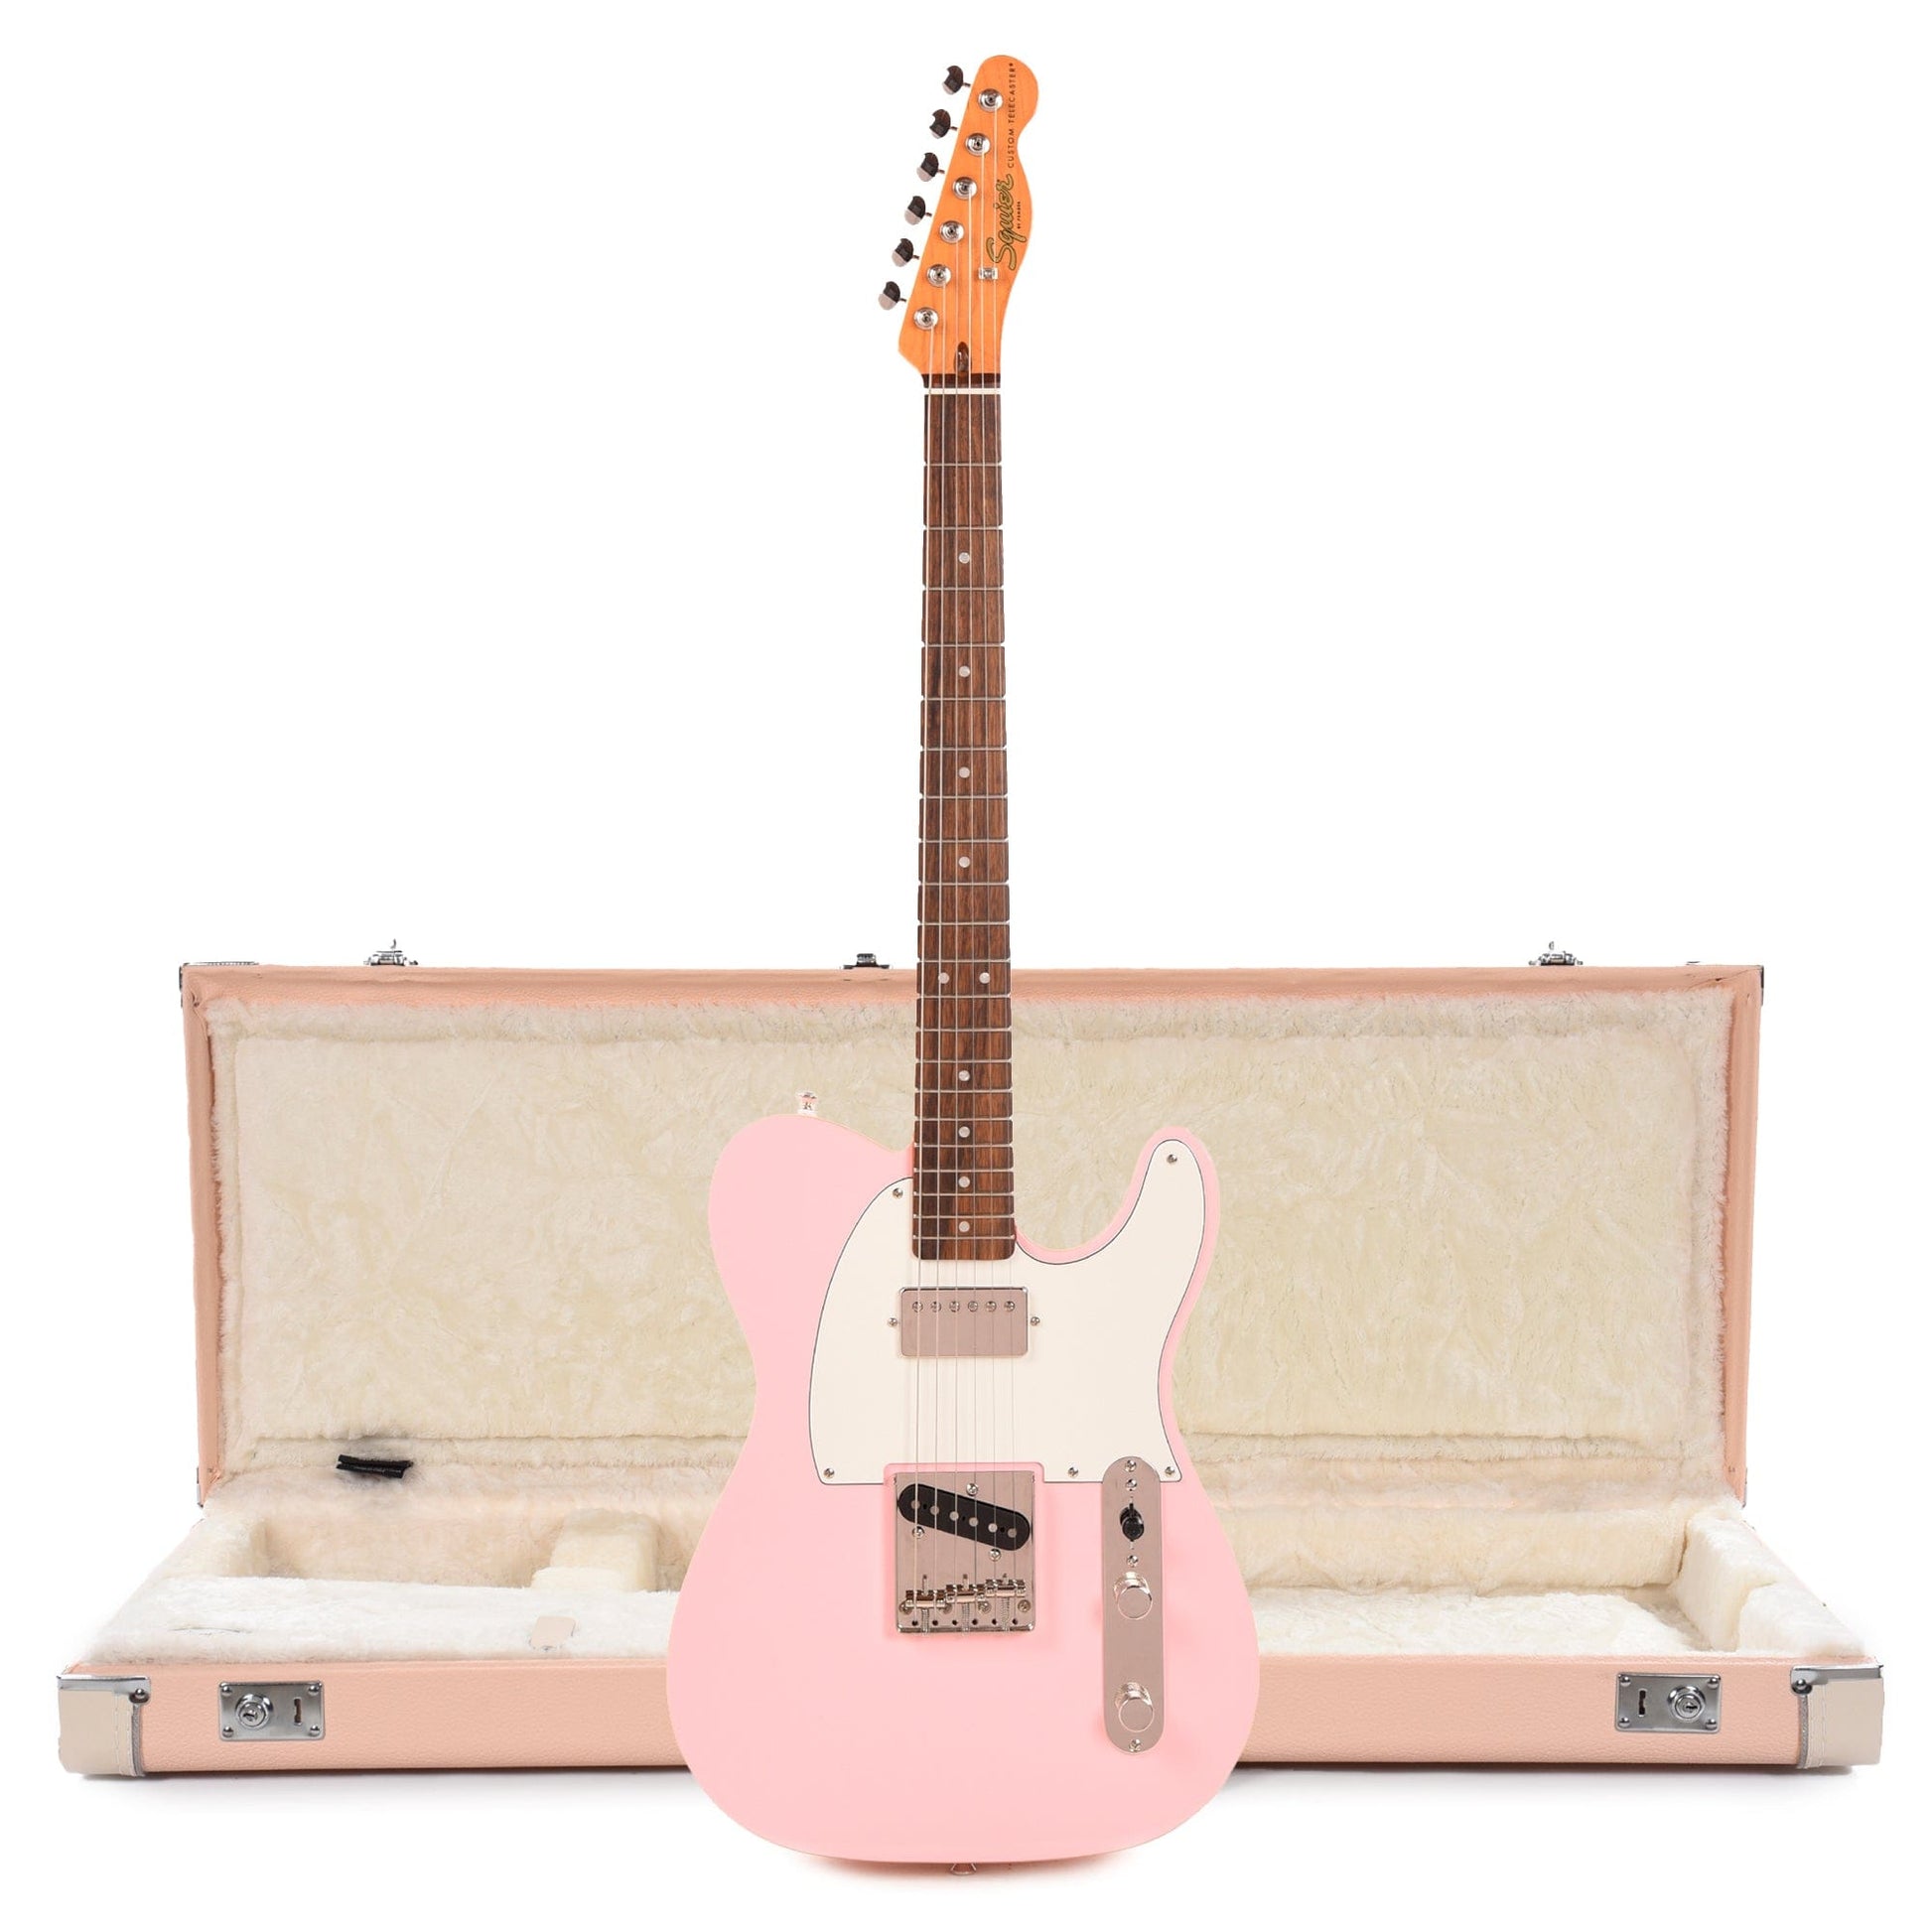 Squier Classic Vibe 60s Custom Telecaster HS Shell Pink and Hardshell Case Strat/Tele Shell Pink w/Cream Interior Electric Guitars / Solid Body